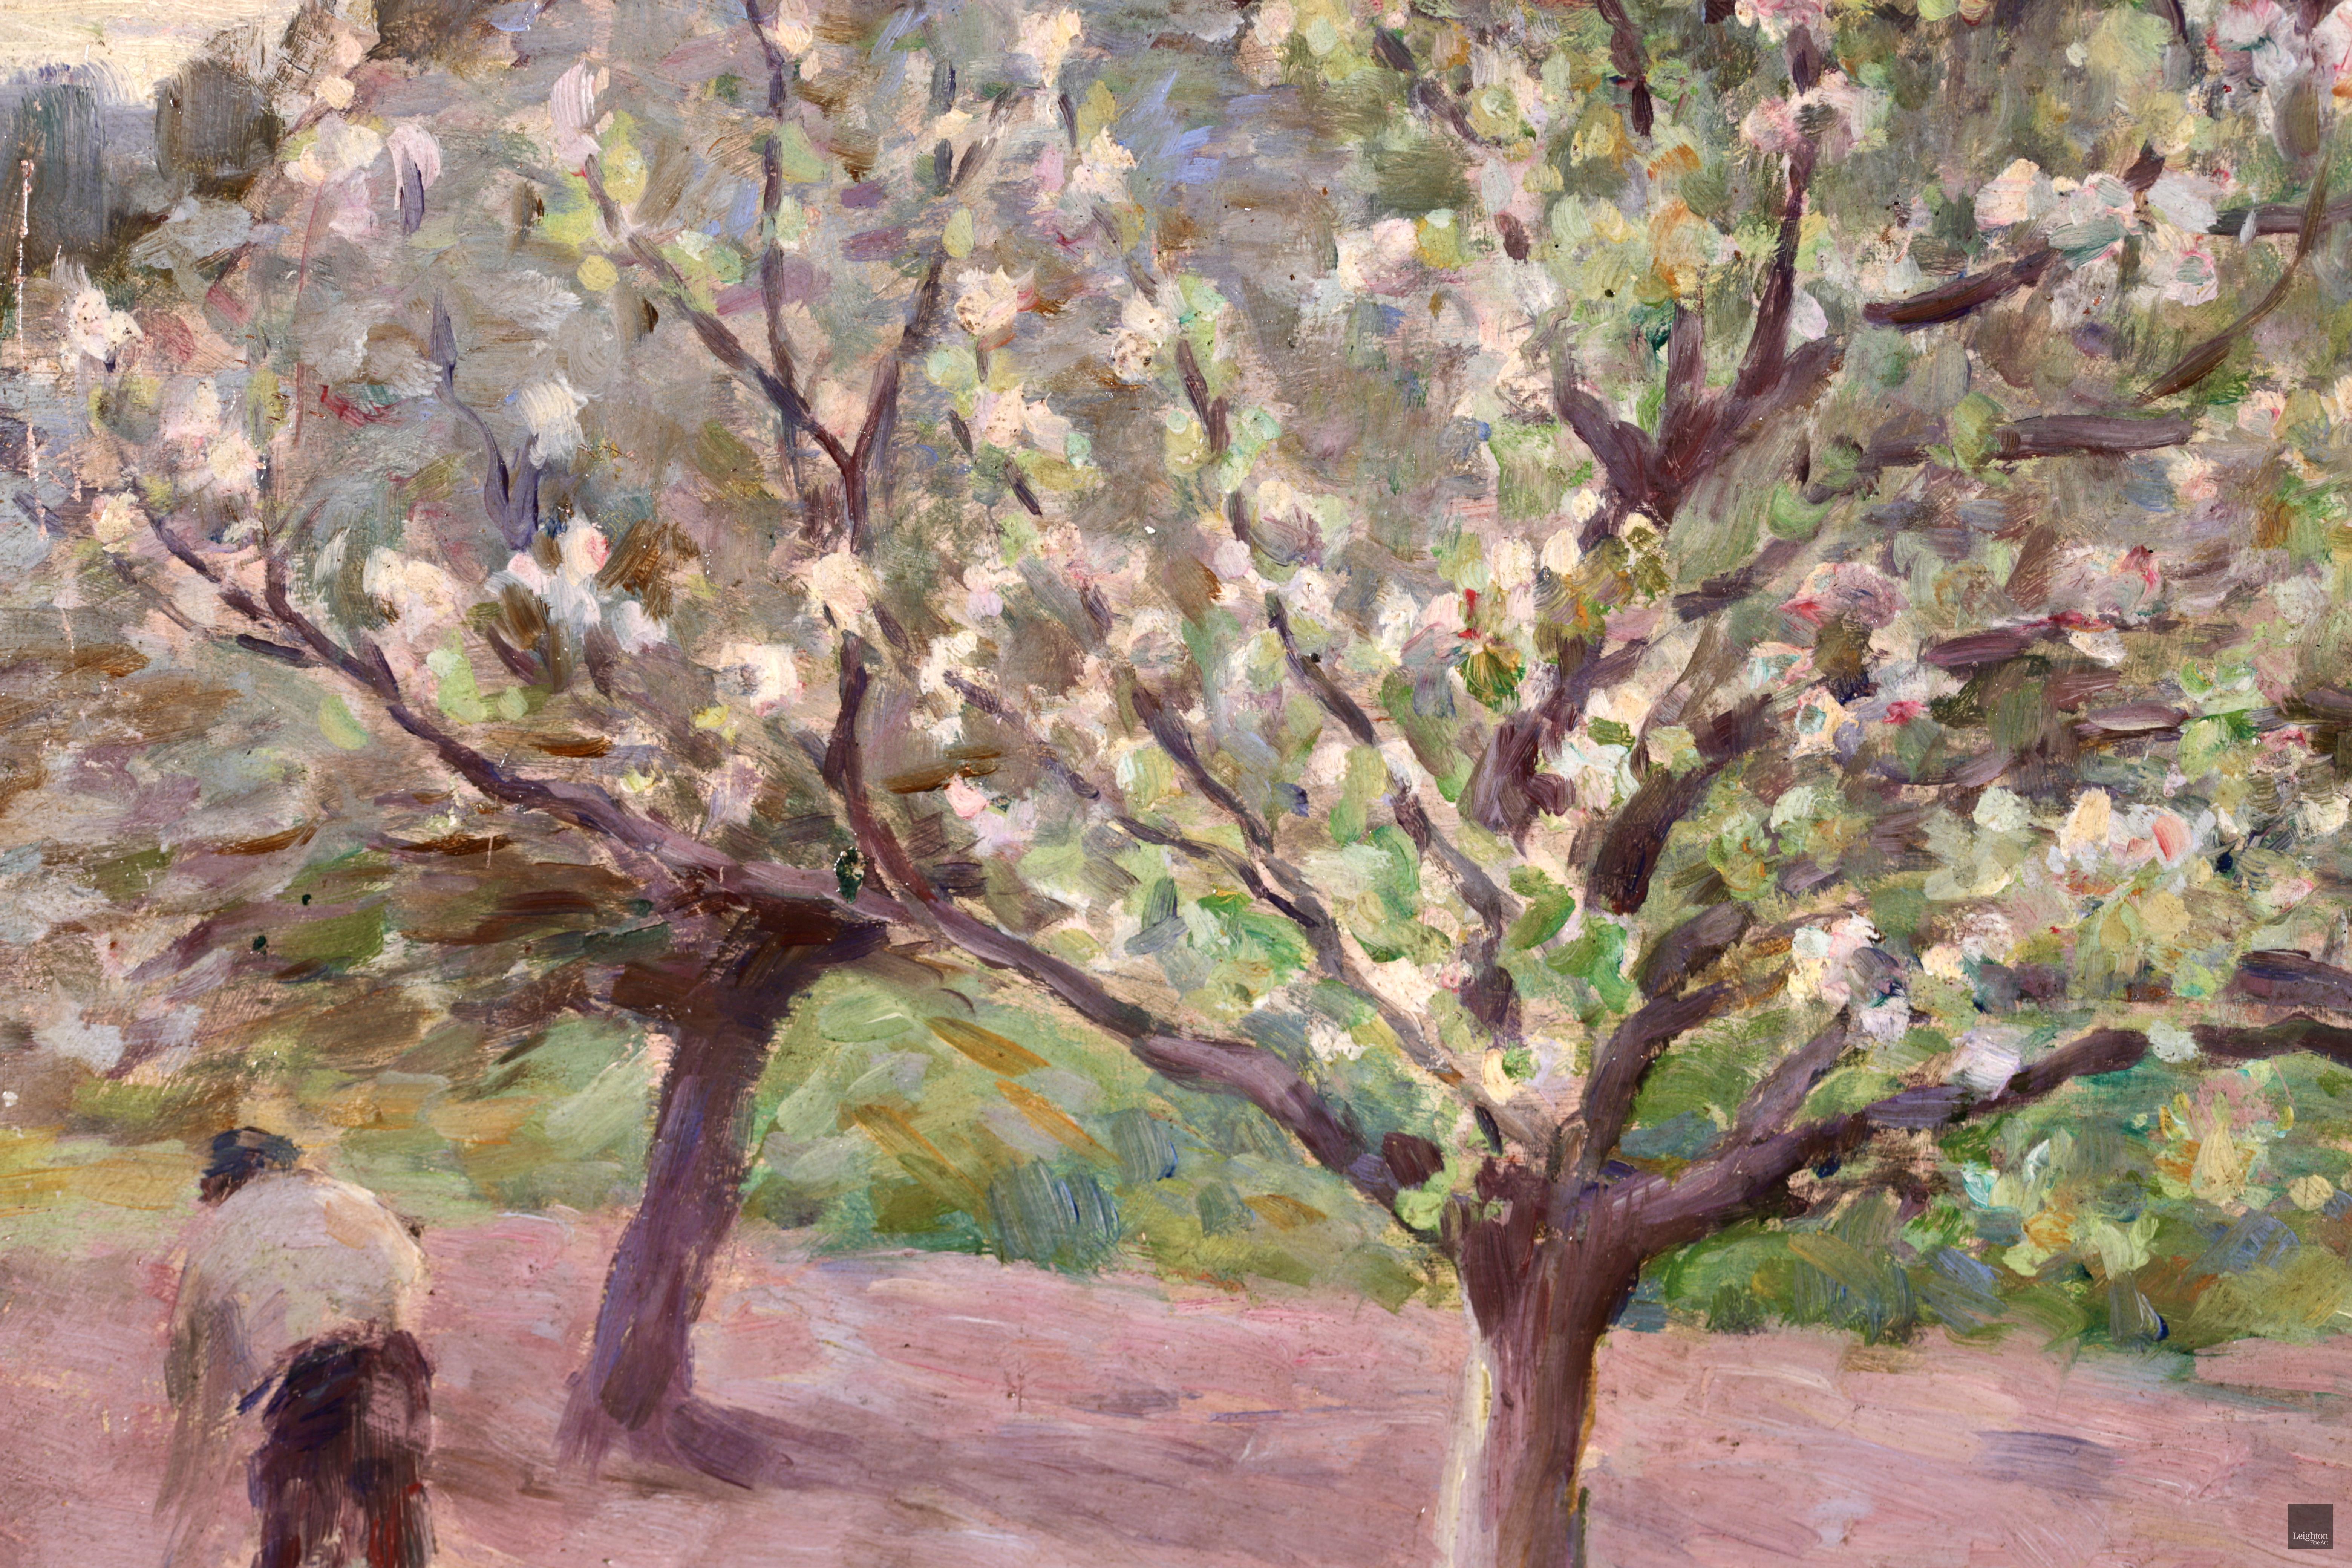 Signed and dated oil on panel figure in landscape by sought after impressionist painter Henri Le Sidaner. The work depicts a farmer walking beneath blossom trees in an orchard in spring. The trees are covered in pink buds starting to blossom and